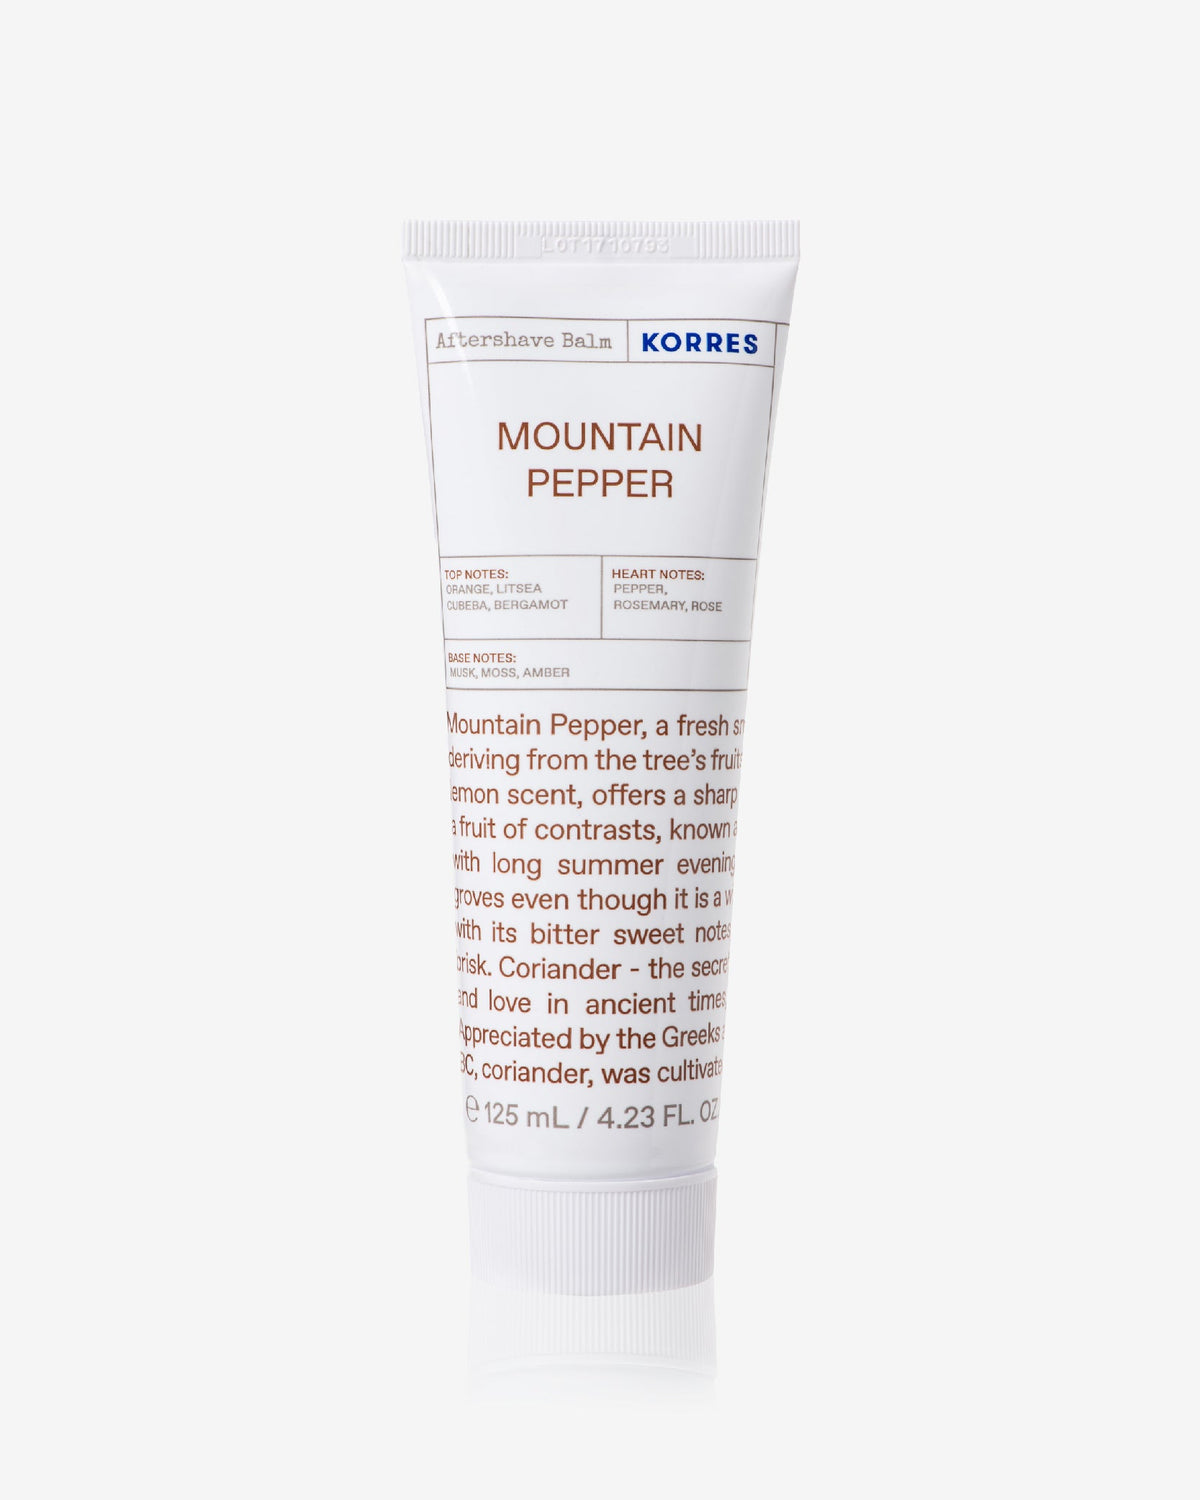 Korres Mountain Pepper Aftershave Cream